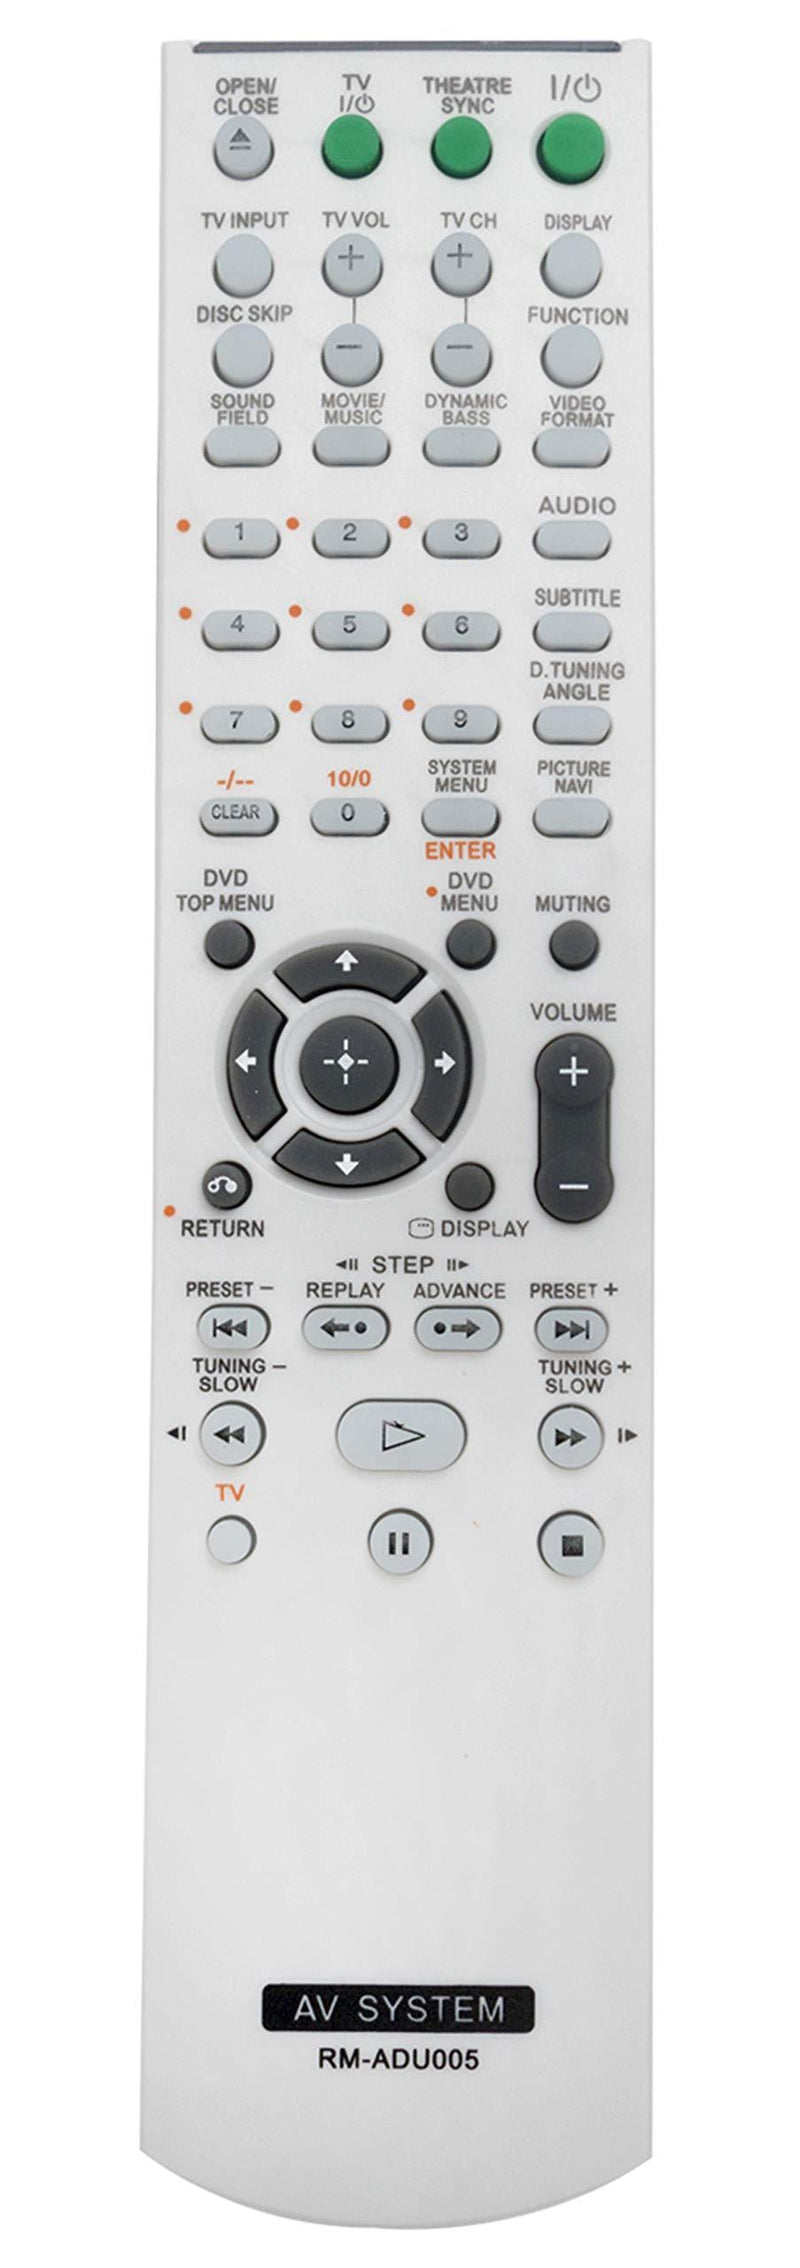 New RM-ADU005 Replace AV System Remote fit for Sony DAV-DZ630 HCD-DZ630 DAV-HDX265 HCD-HDX265 HCD-DZ231 DAV-HDZ235 HCD-HDZ235 DAV-DZ30 DAV-DZ530 DVD Home Theatre System - LeoForward Australia